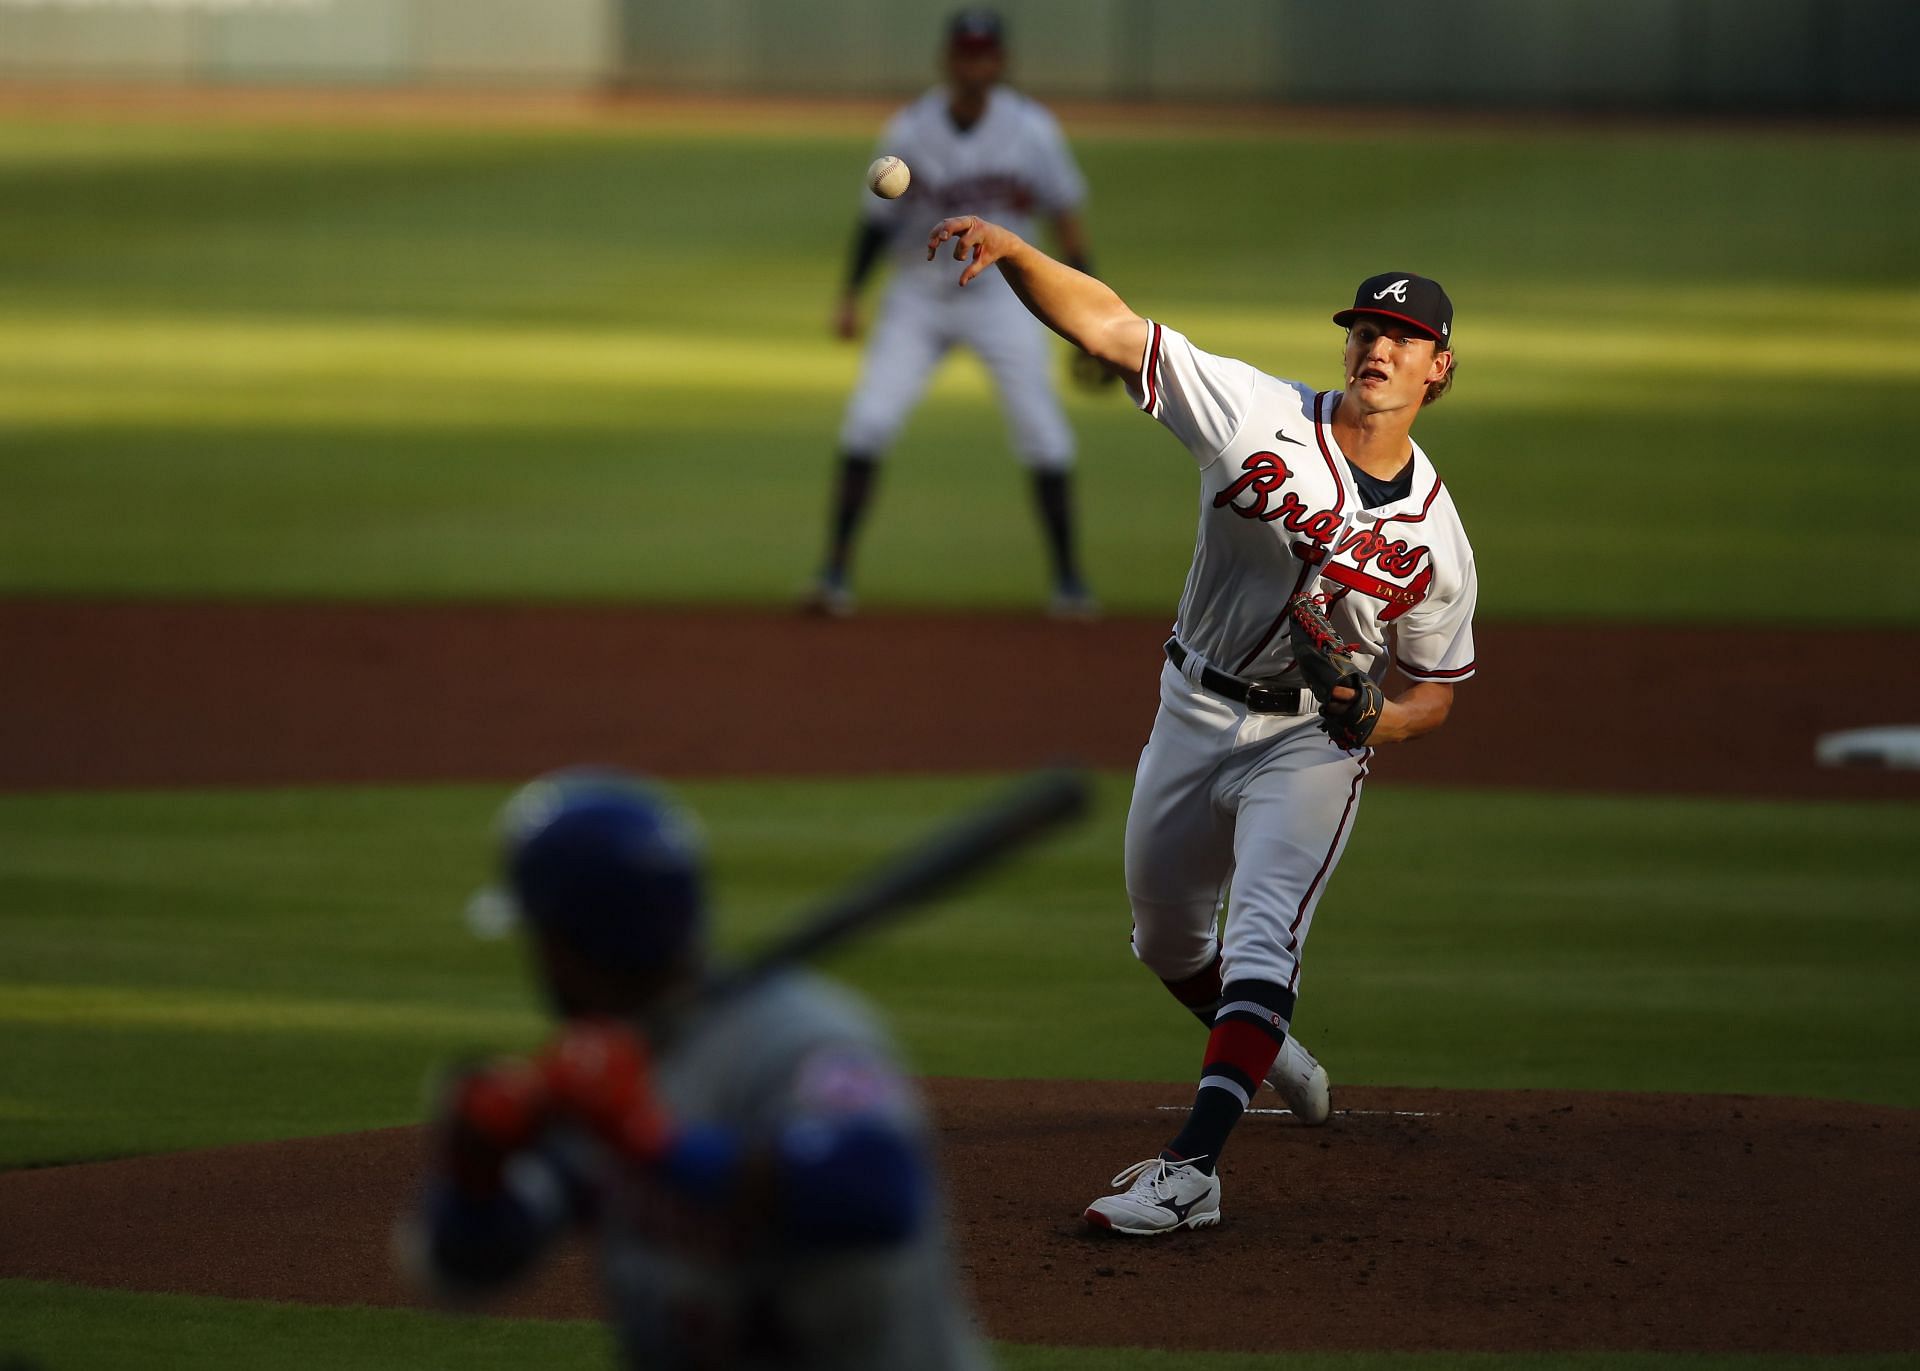 Mike Soroka #40 of the Atlanta Braves pitches against the New York Mets on August 3, 2020